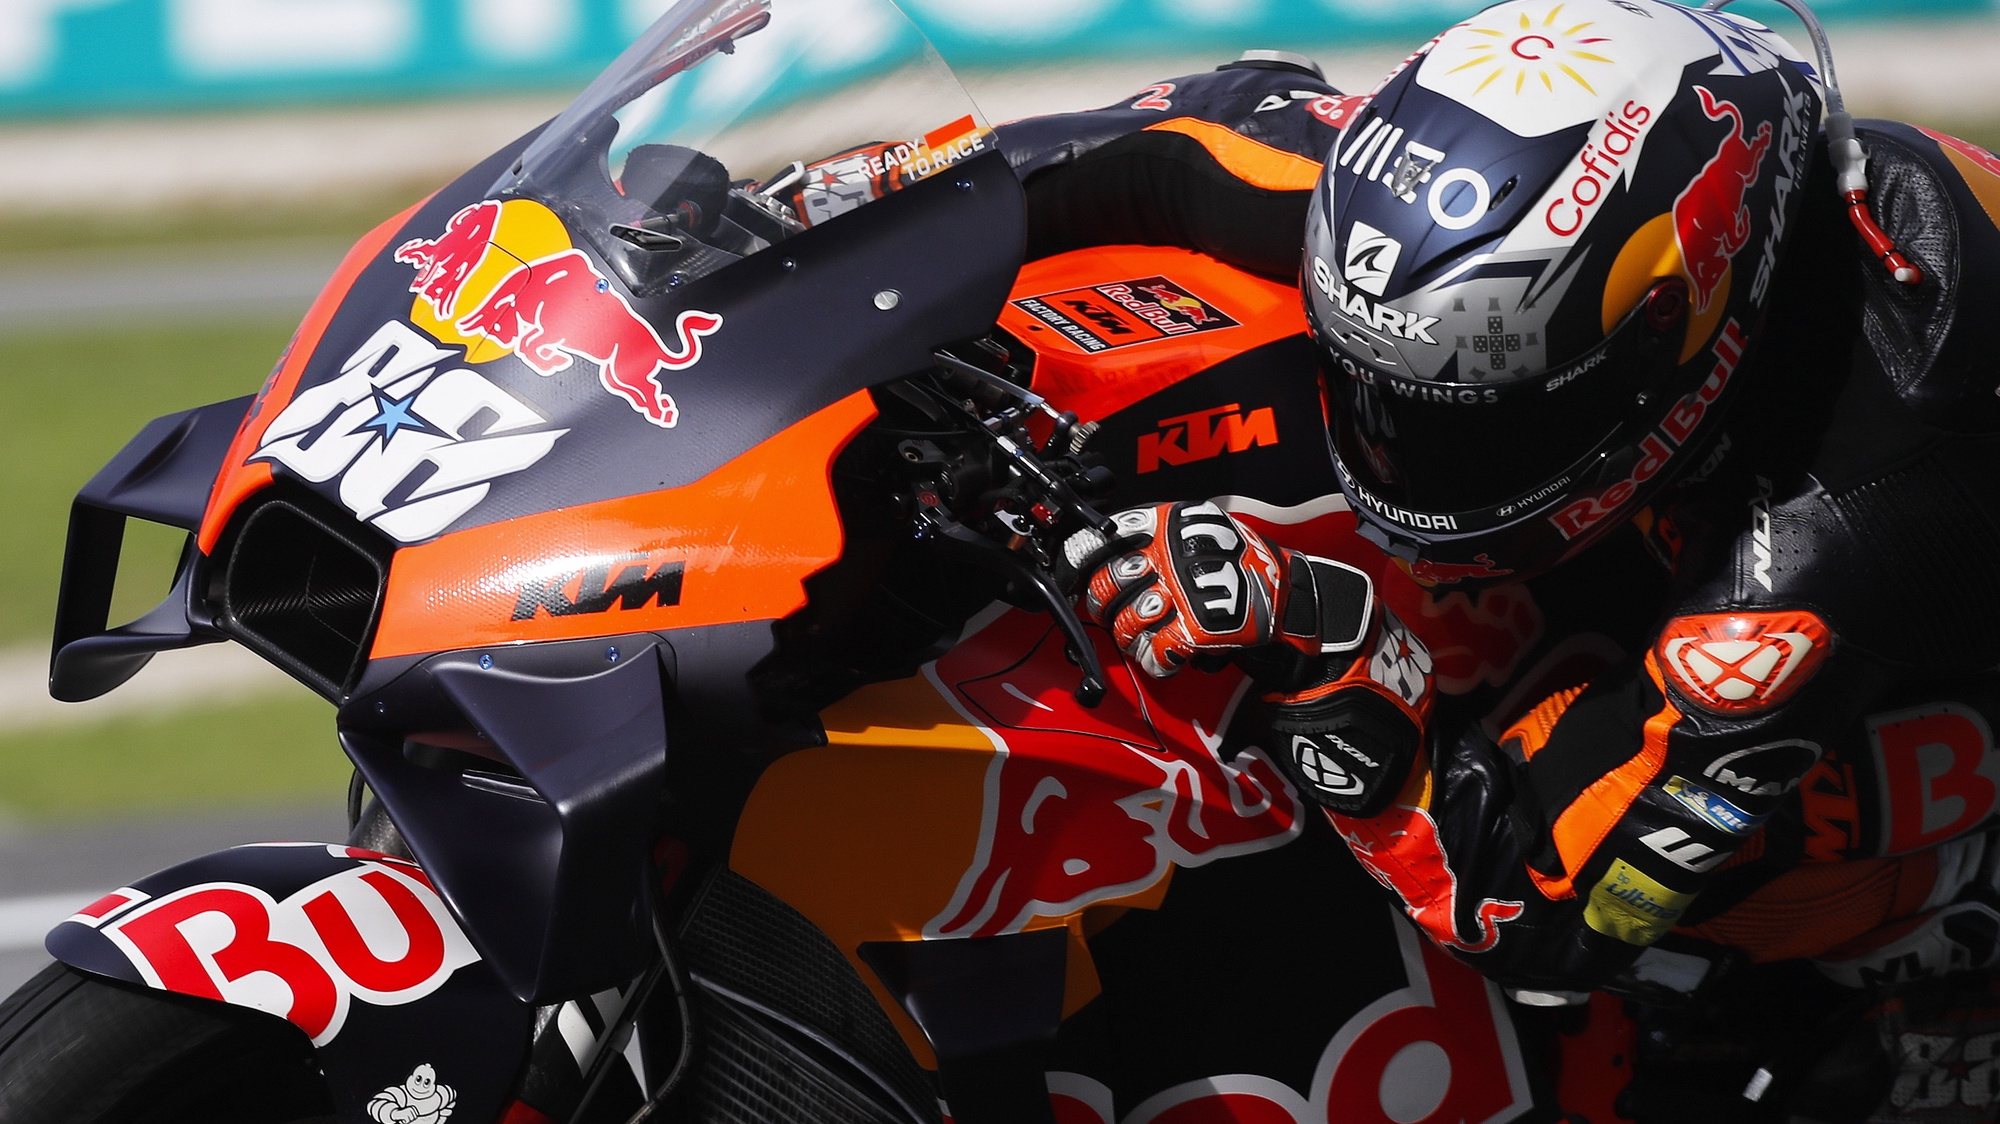 epa10256726 Portuguese rider Miguel Oliveira of Red Bull KTM Factory Racing in action during free practice session at the Malaysia Motorcycling Grand Prix in Sepang, Malaysia, 21 October 2022. The 2022 Malaysia Motorcycling Grand Prix will take place on 23 October.  EPA/FAZRY ISMAIL